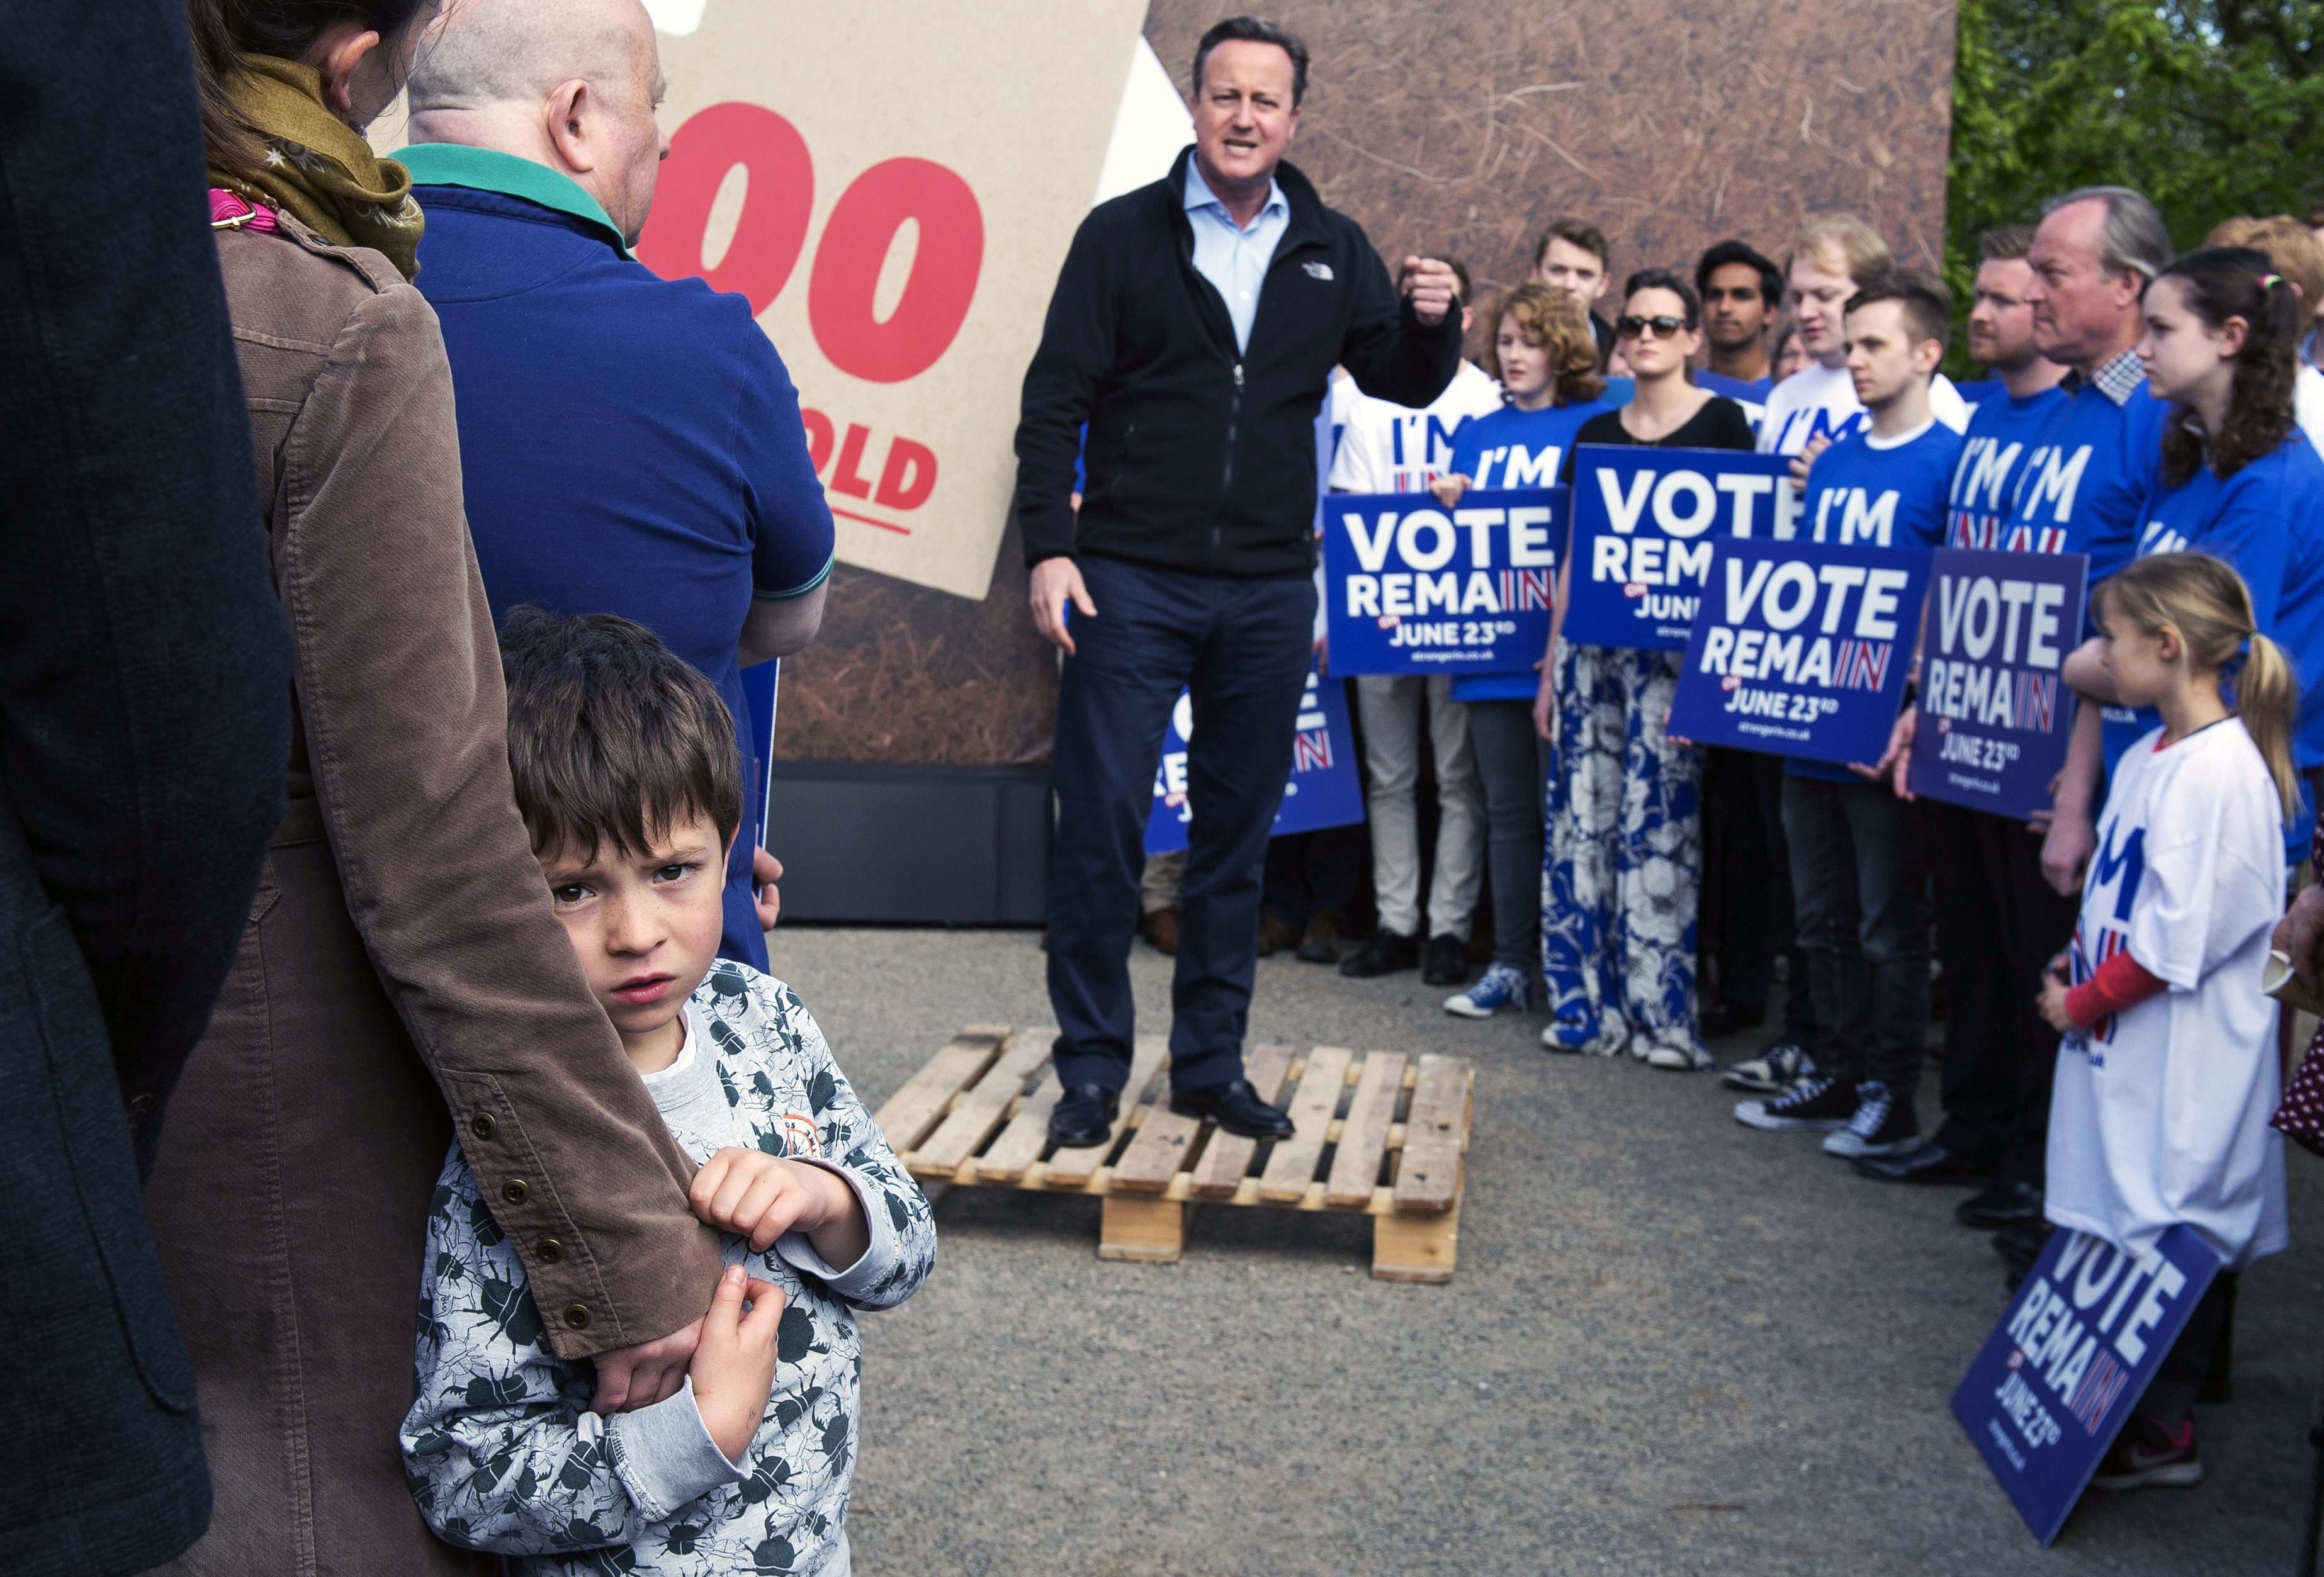 British Prime Minister David Cameron delivers a speech to supporters of the Remain campaign in Witney, Oxfordshire, last month. Photo: EPA